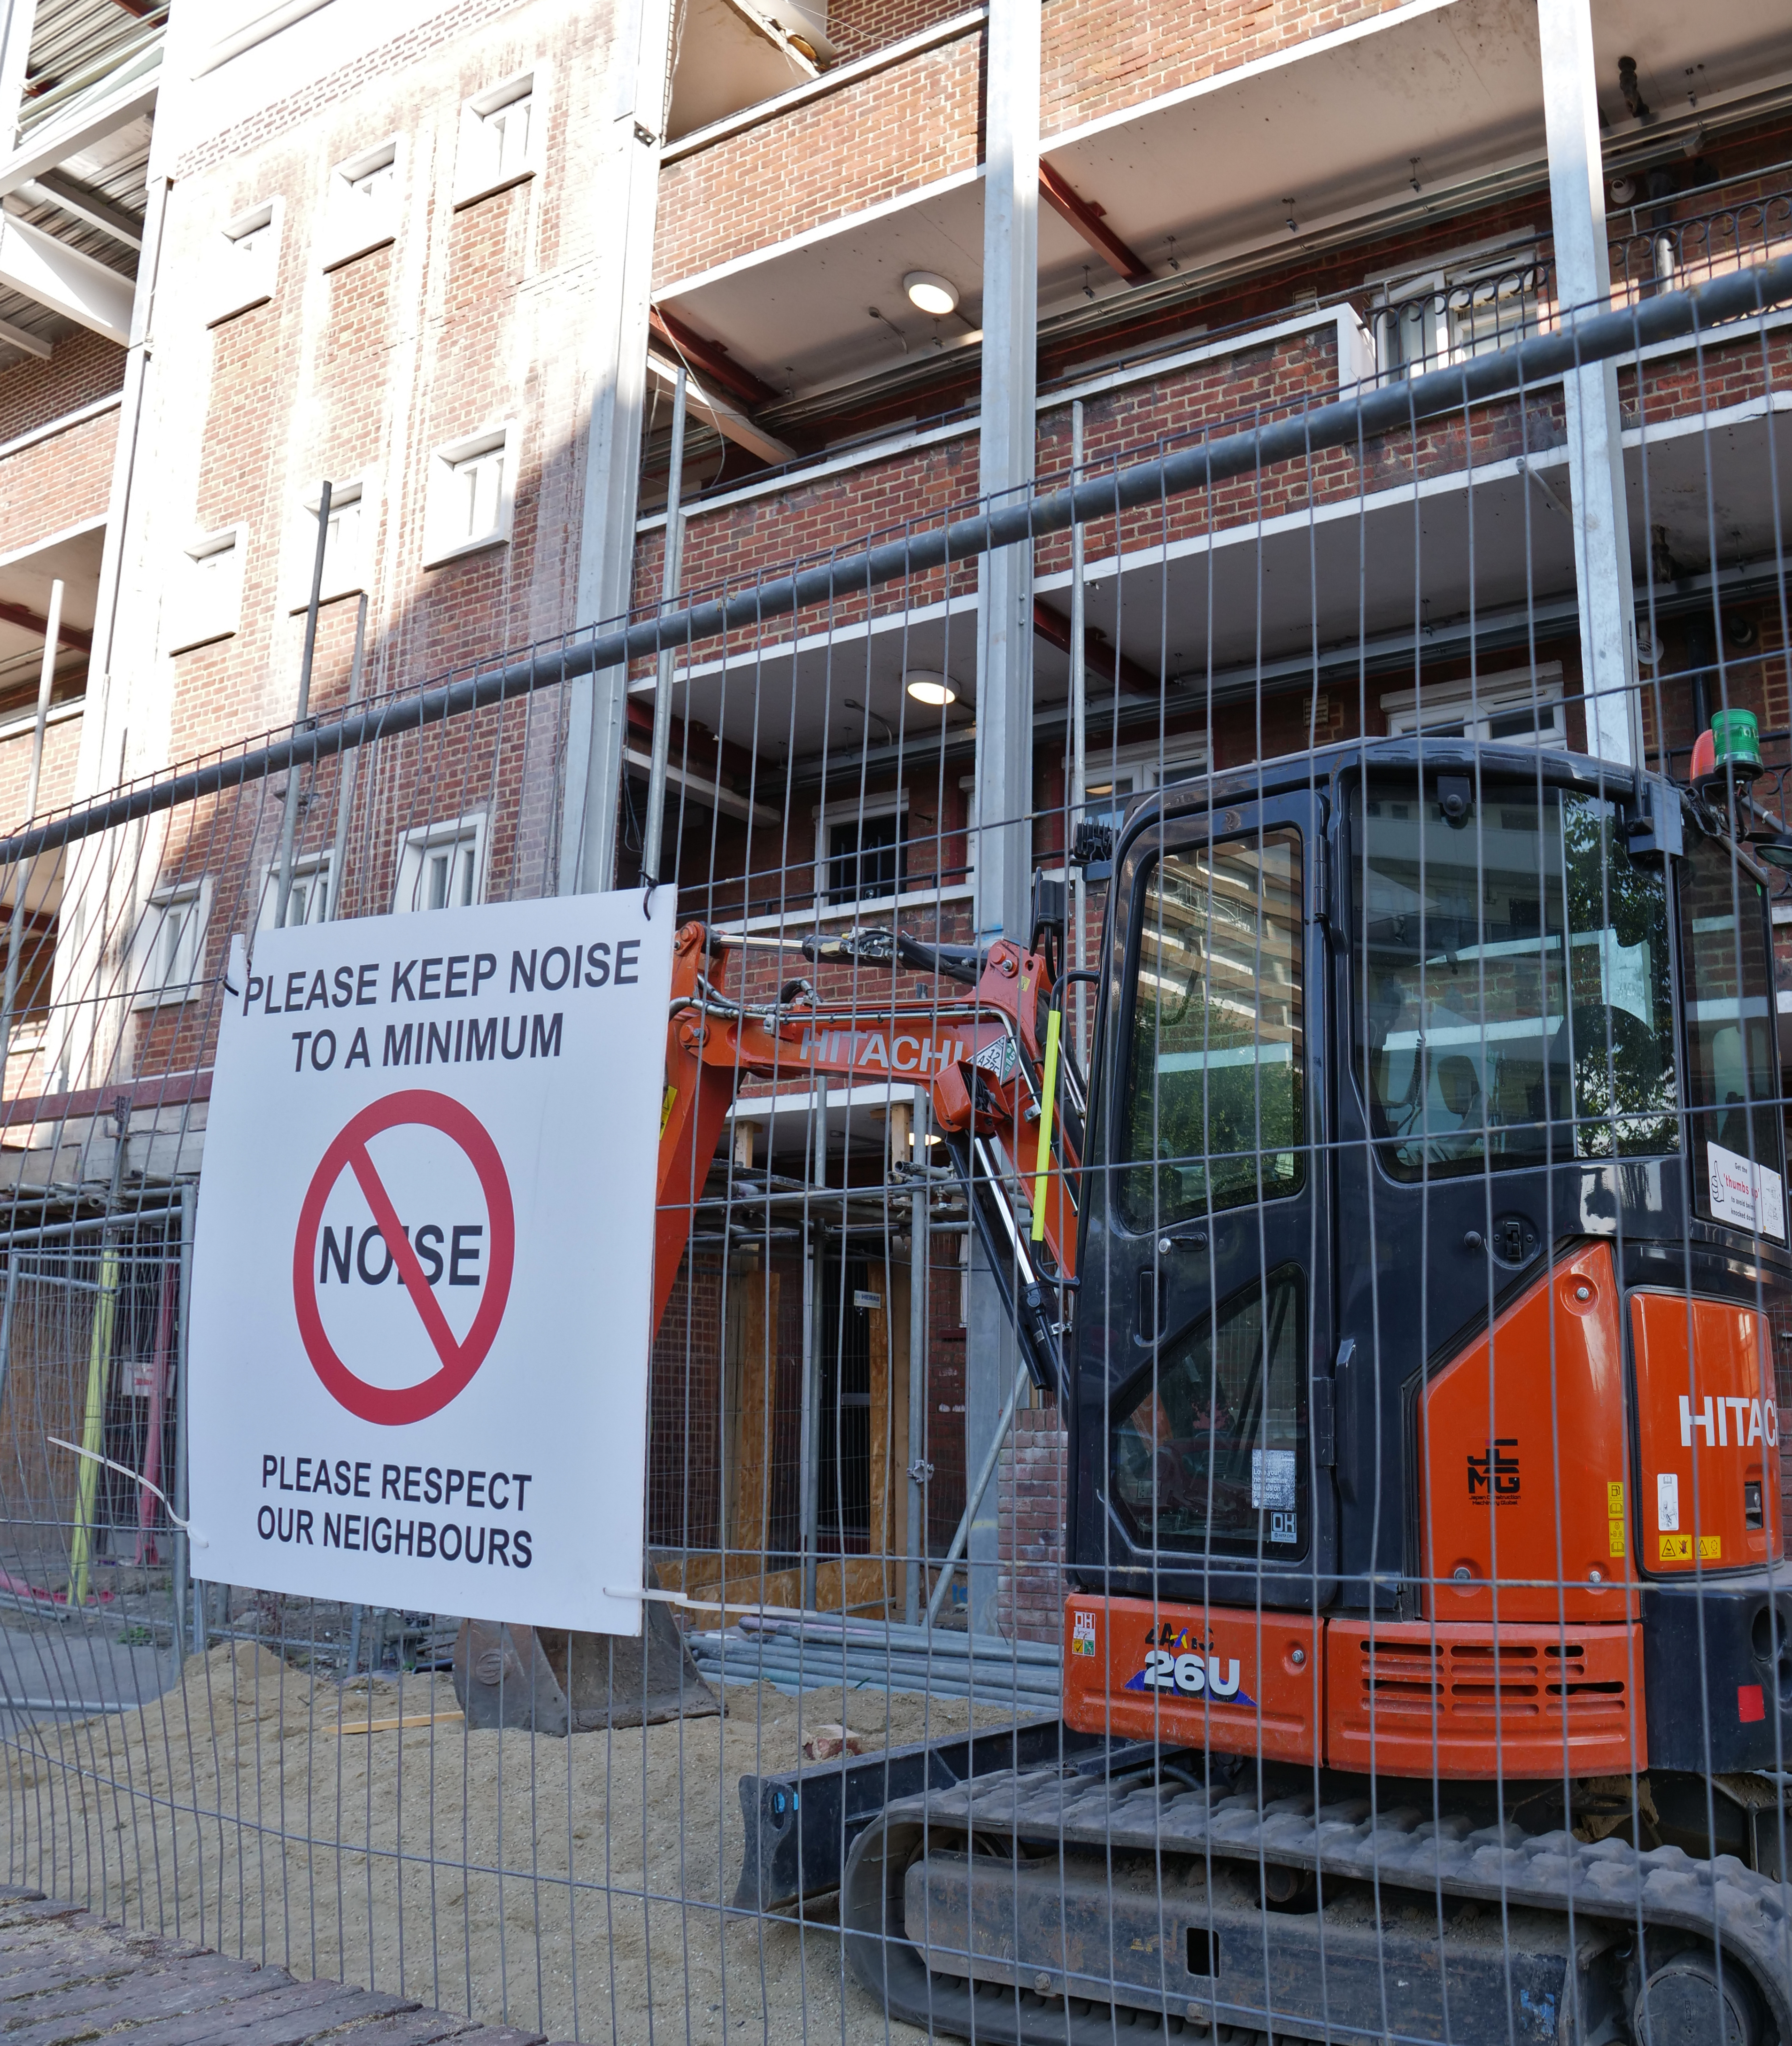 A sign attached to a Heras fence admonishing passers by to "PLEASE KEEP NOISE TO A MINIMUM". Behind the fence is a Hitachi mini digger on top of a pile of sand.